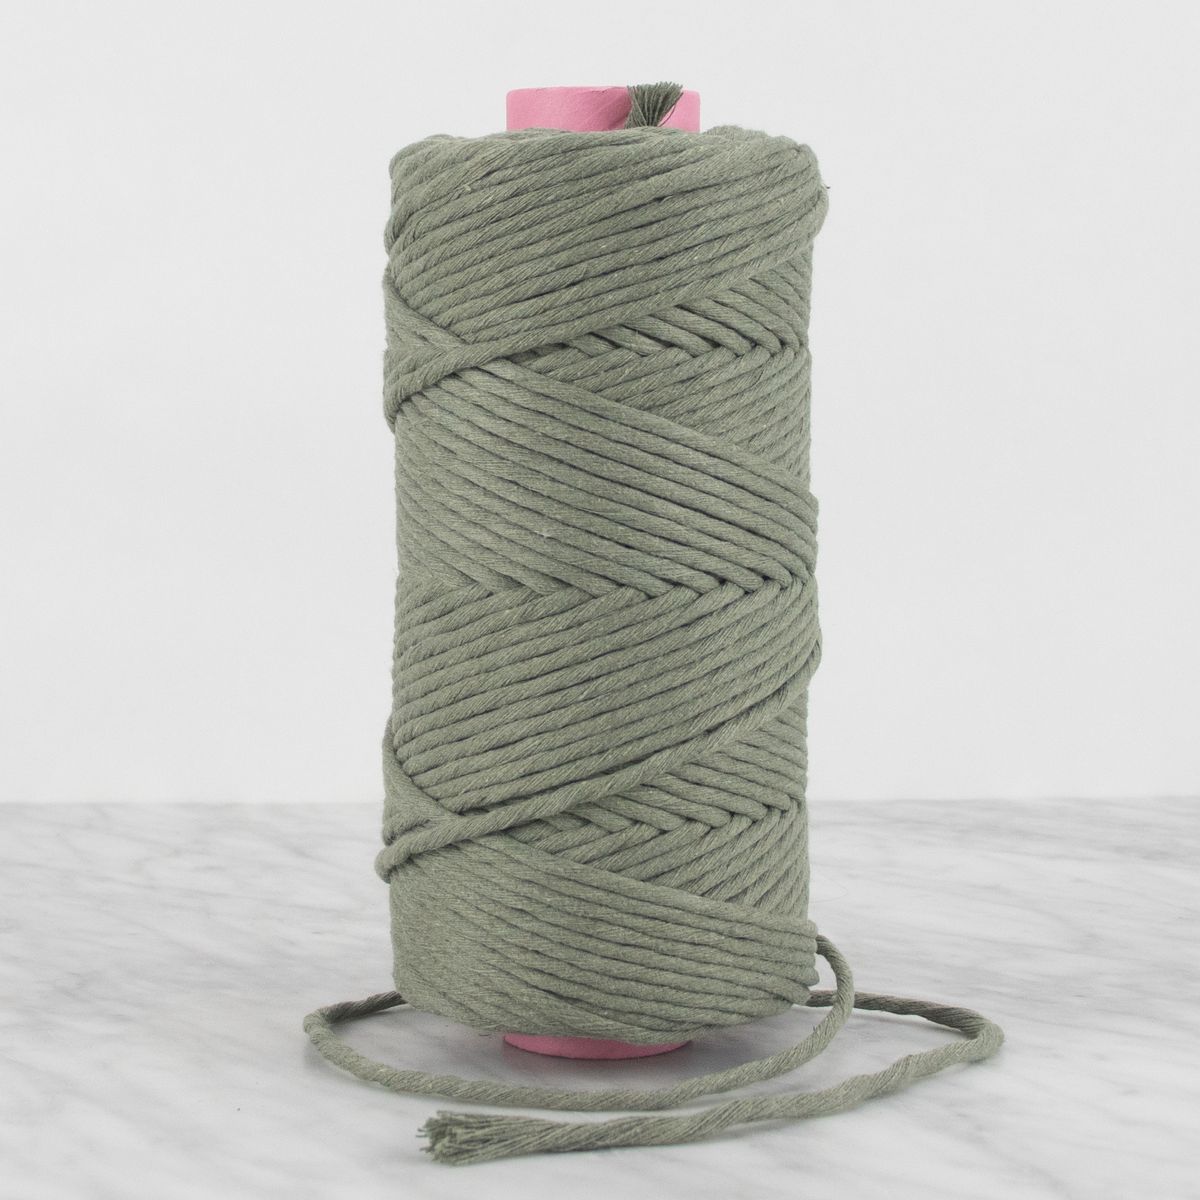 5mm Recycled Cotton String 0.5 kg - Sage